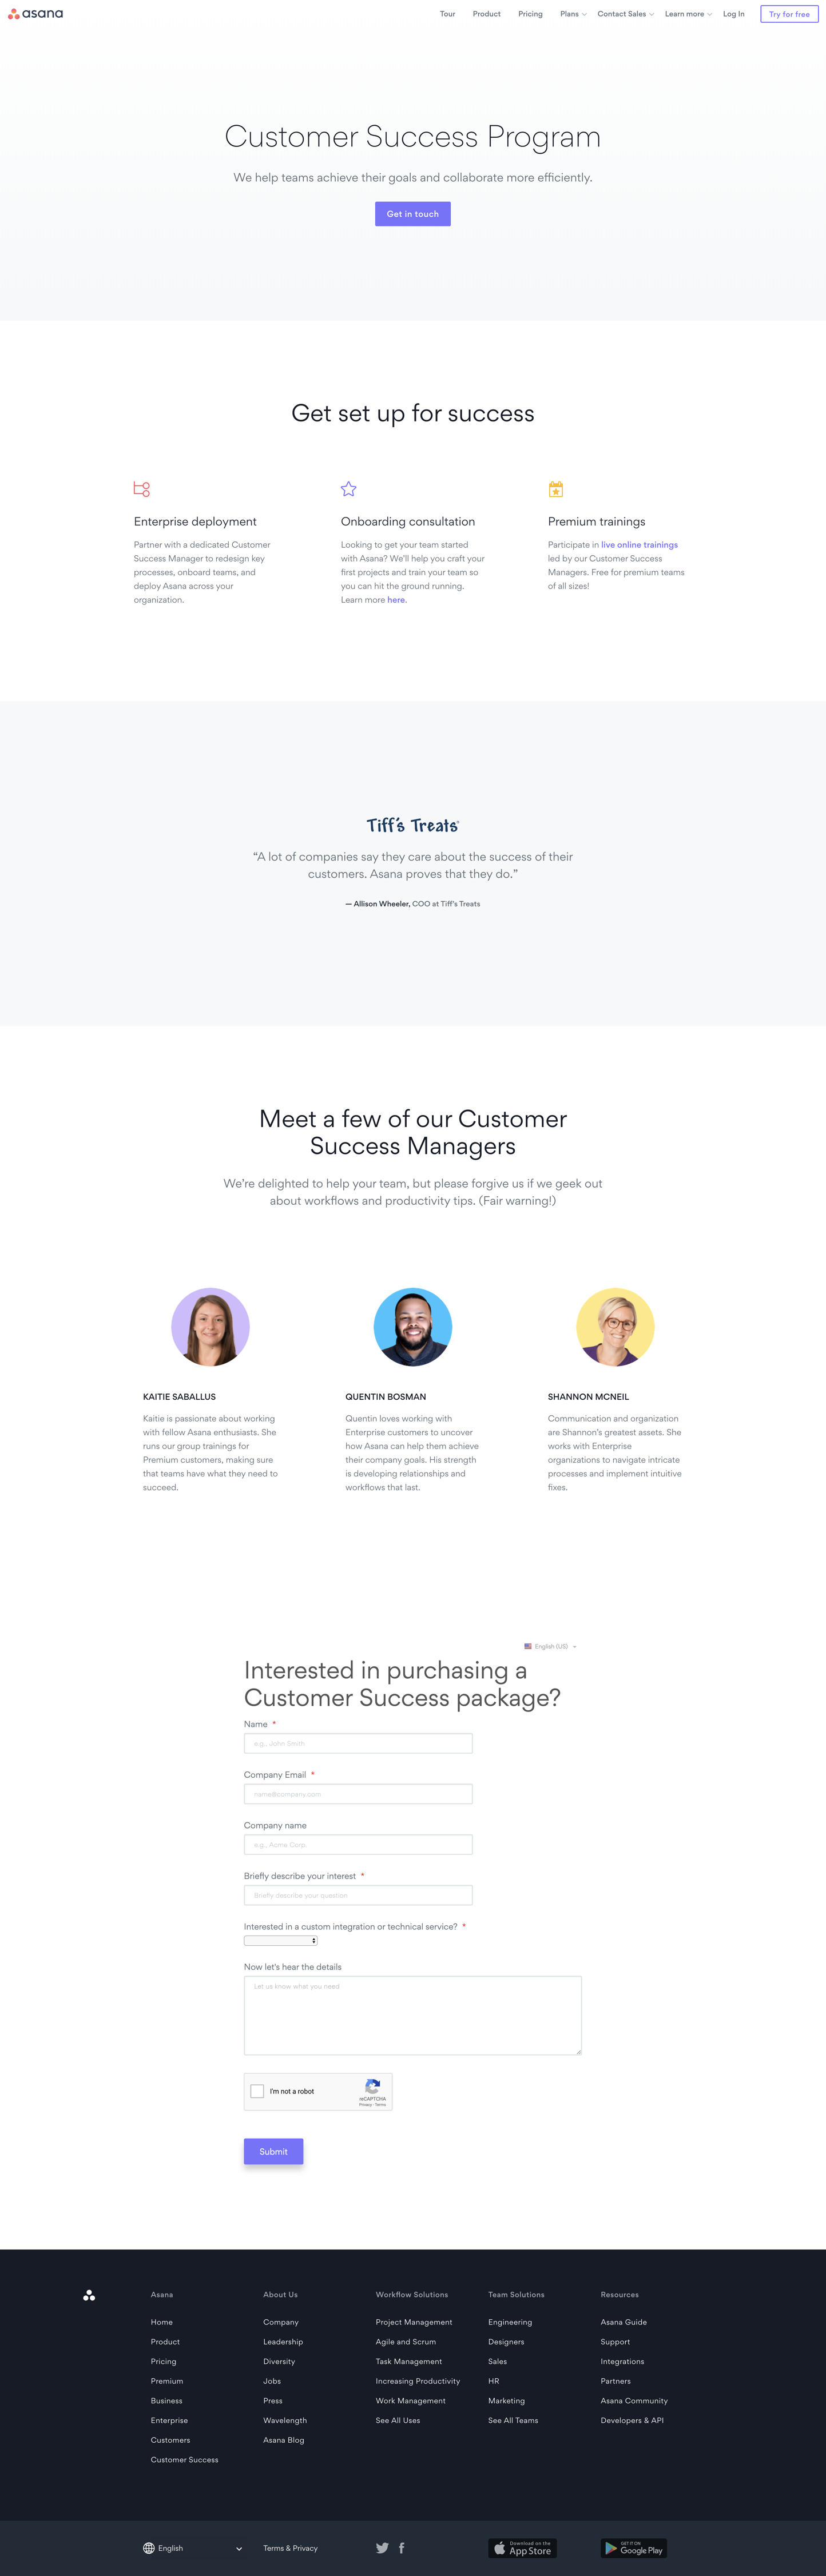 Screenshot of the Customer Success page from the Asana website.